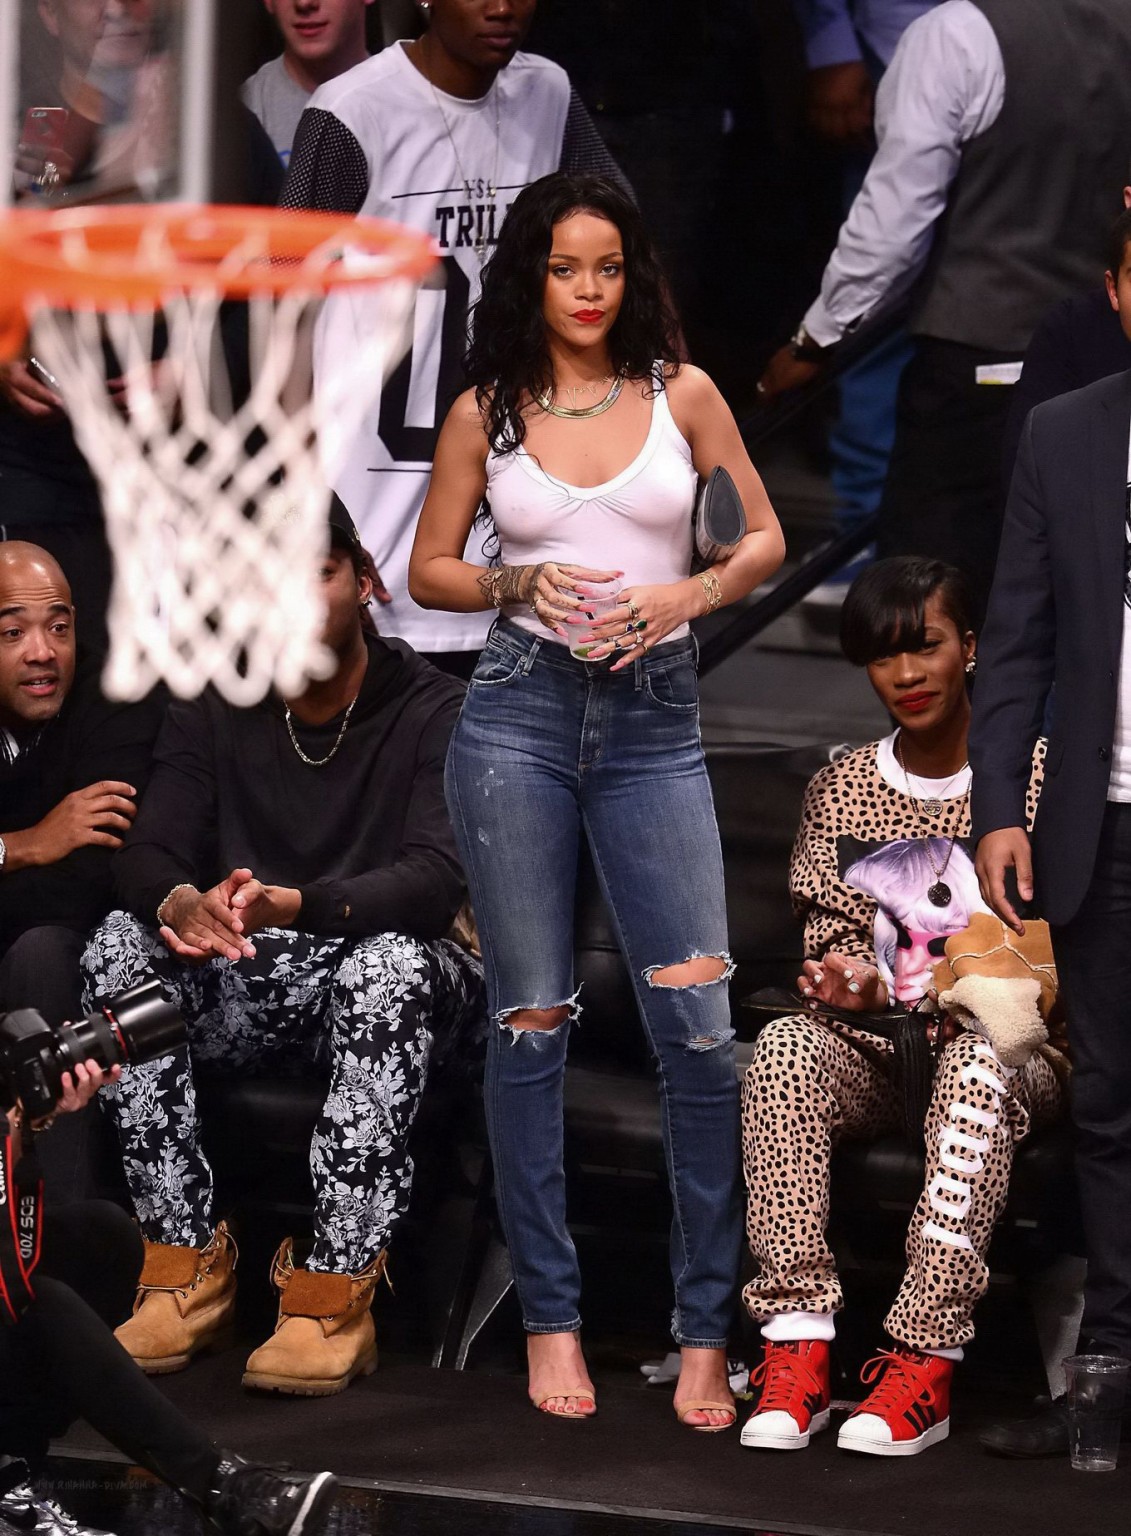 Rihanna shows off her boobs in seethru top at a basketball game in NYC #75198030